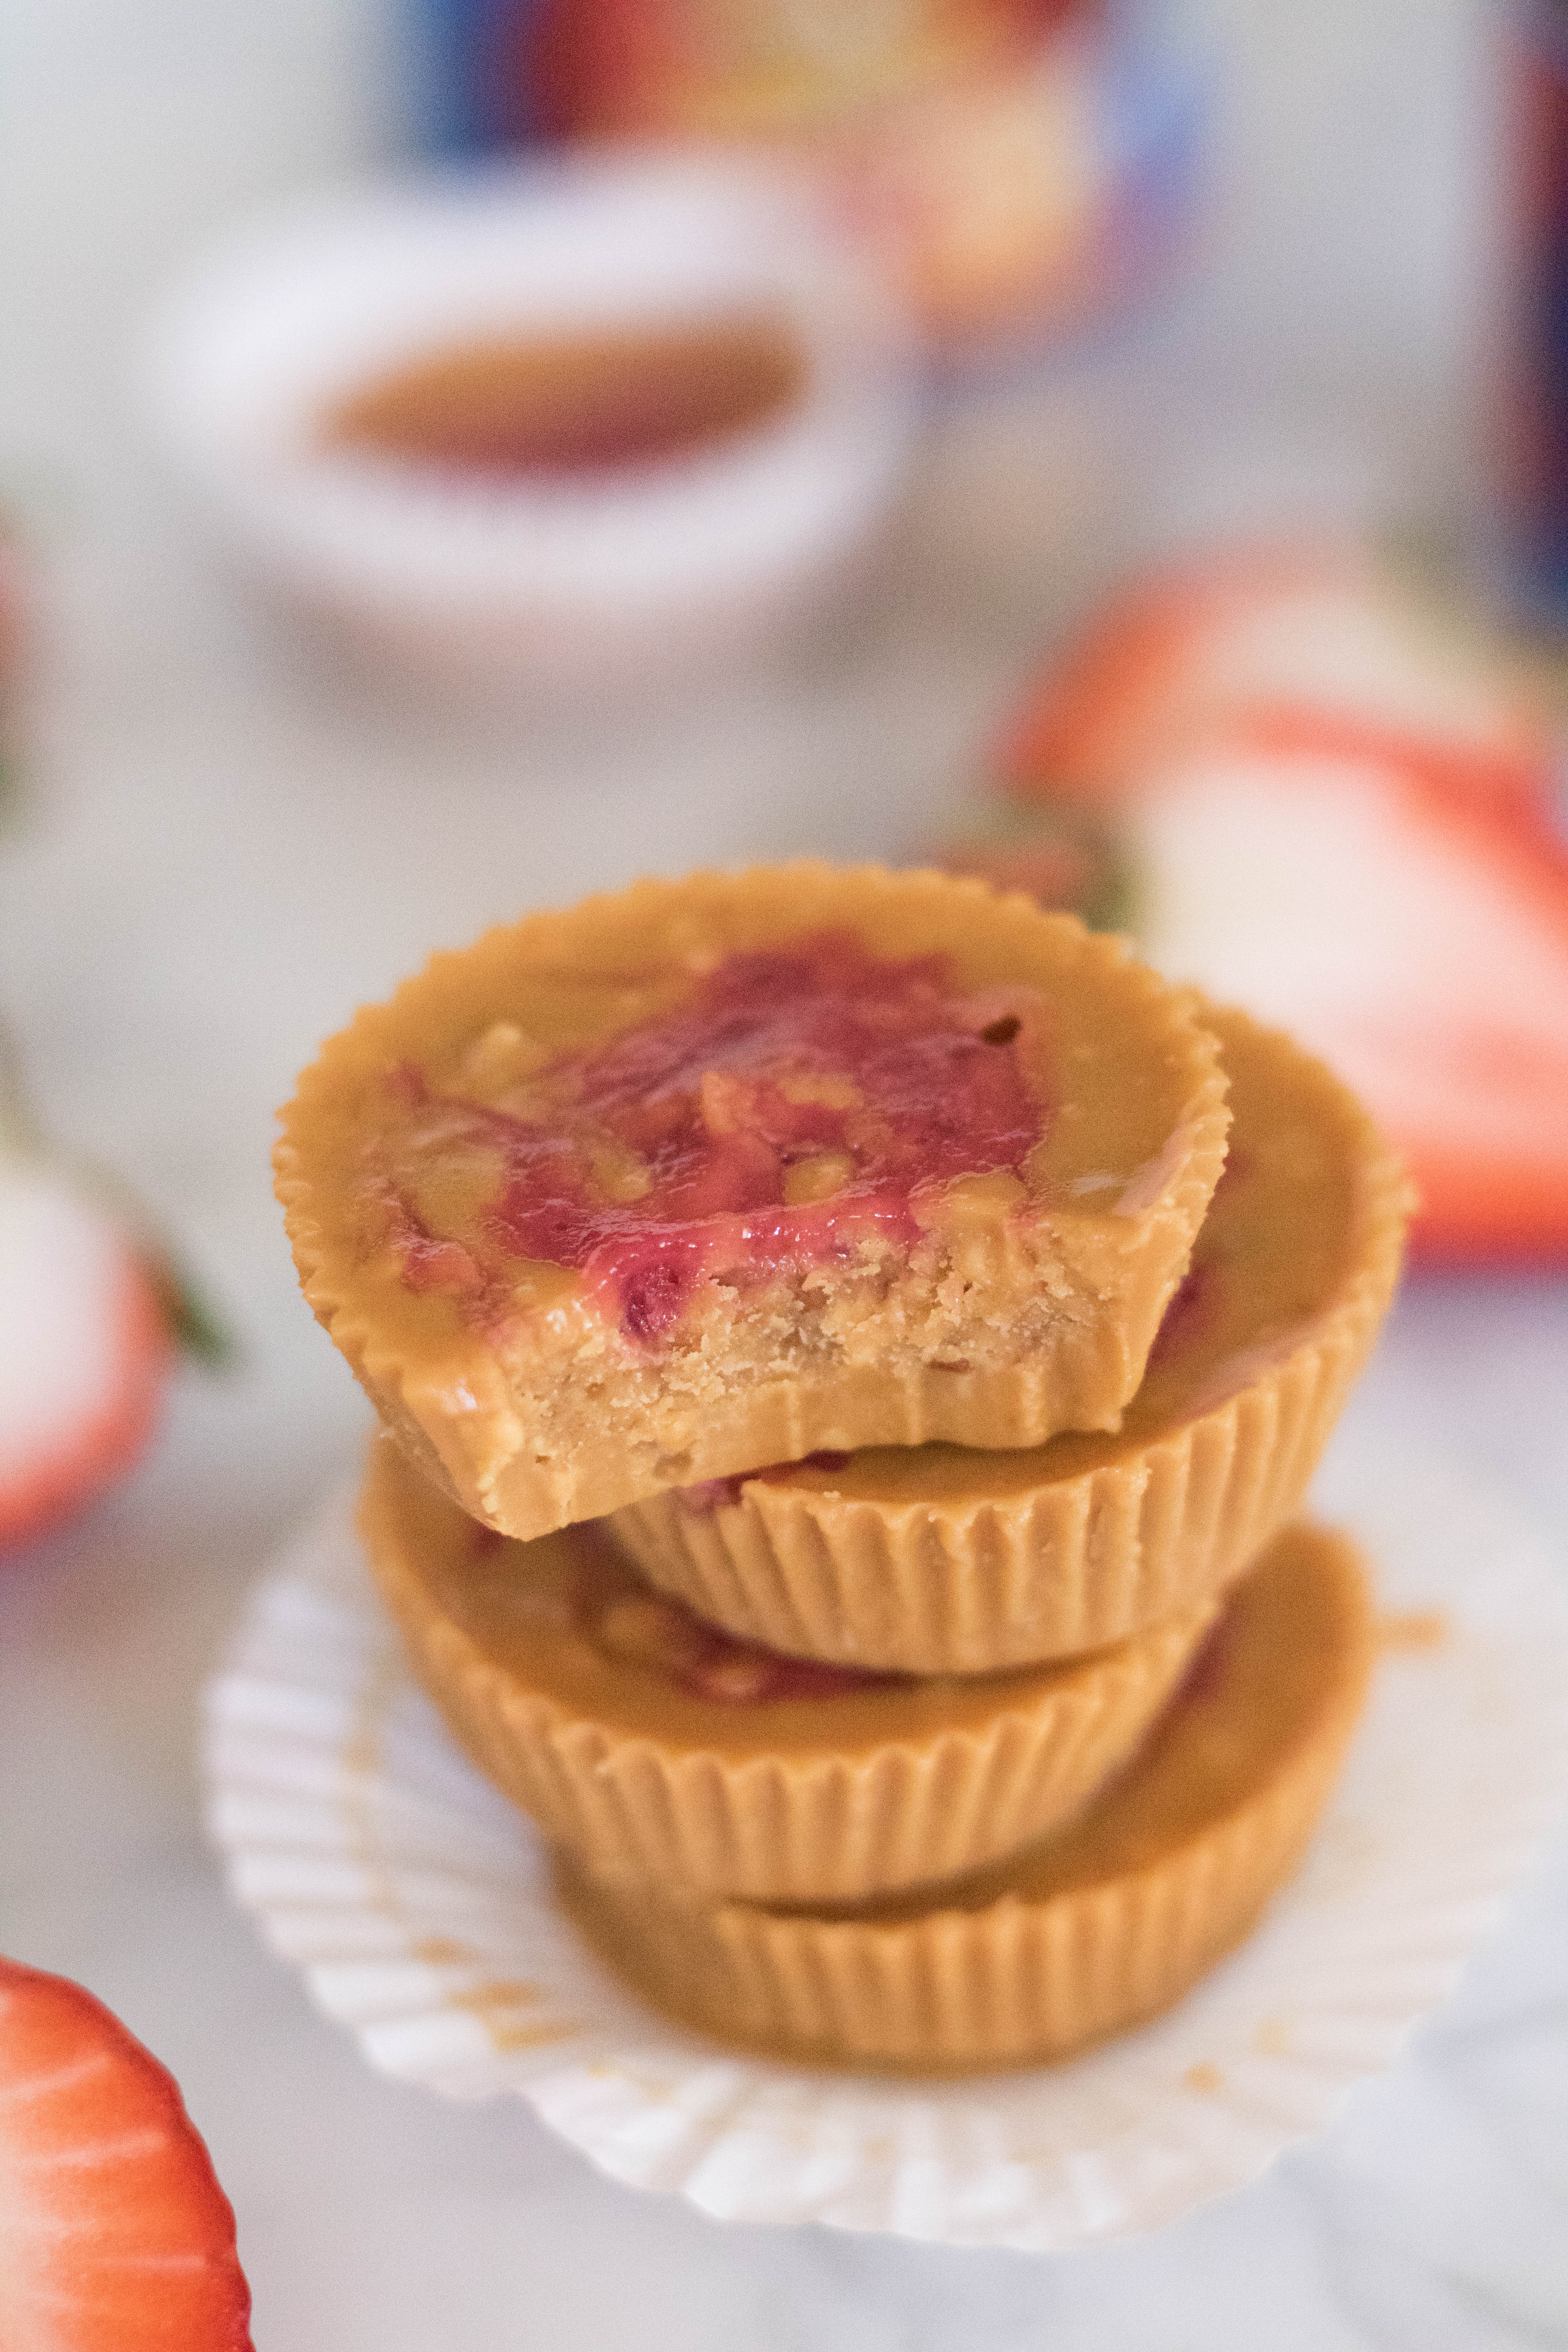 Birds eye view and close up of the healthier peanut butter and jelly cups